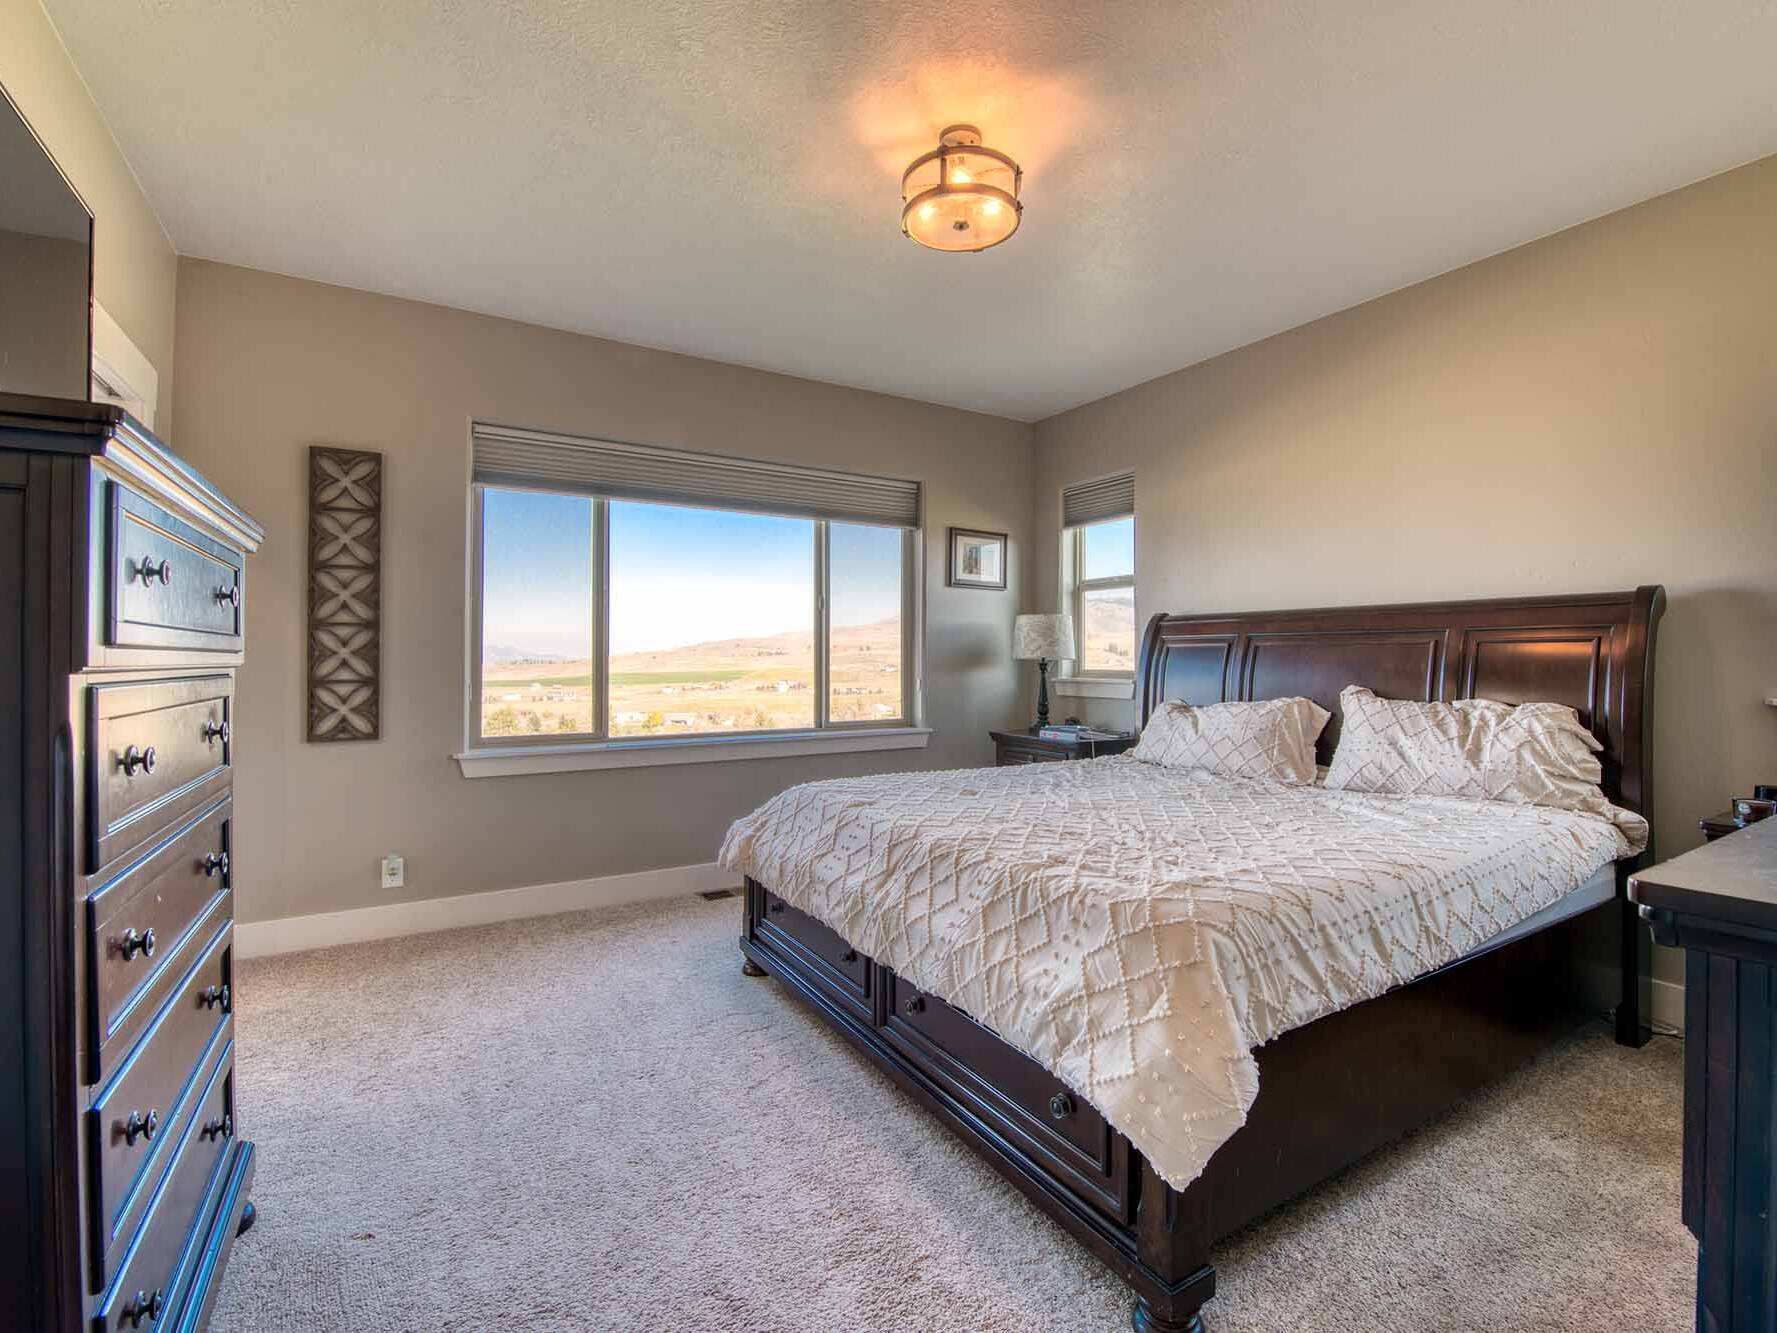 Master bedroom in The Copper Creek model home - Built by Big Sky Builder in Florence, MT